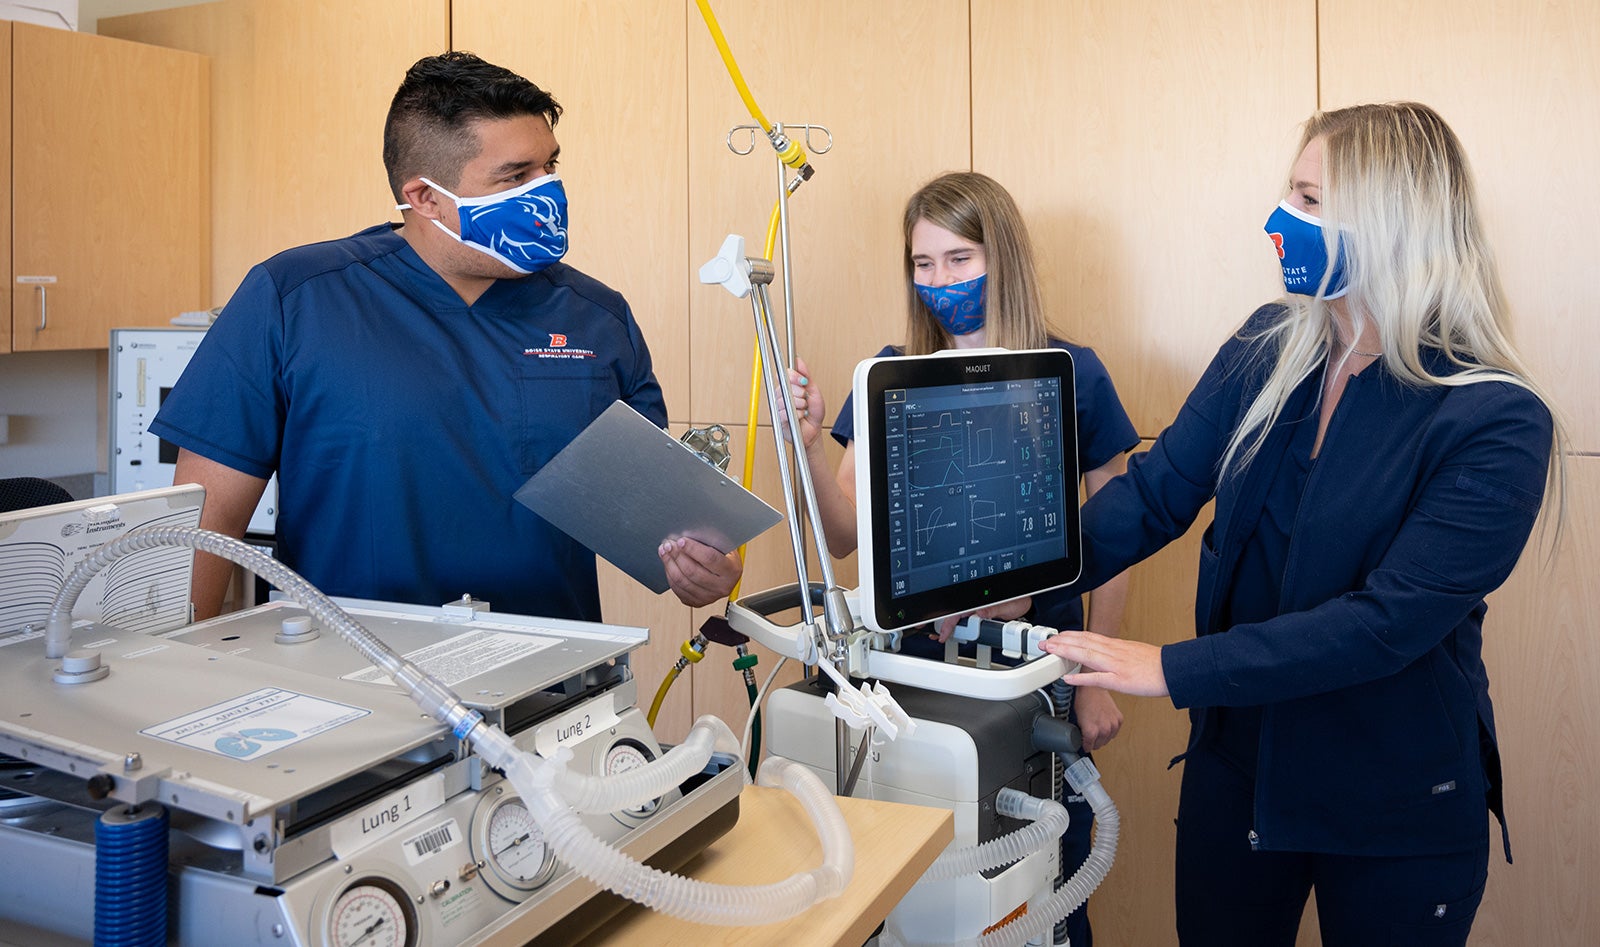 One male, two female respiratory care students gather around a mechanical ventilator